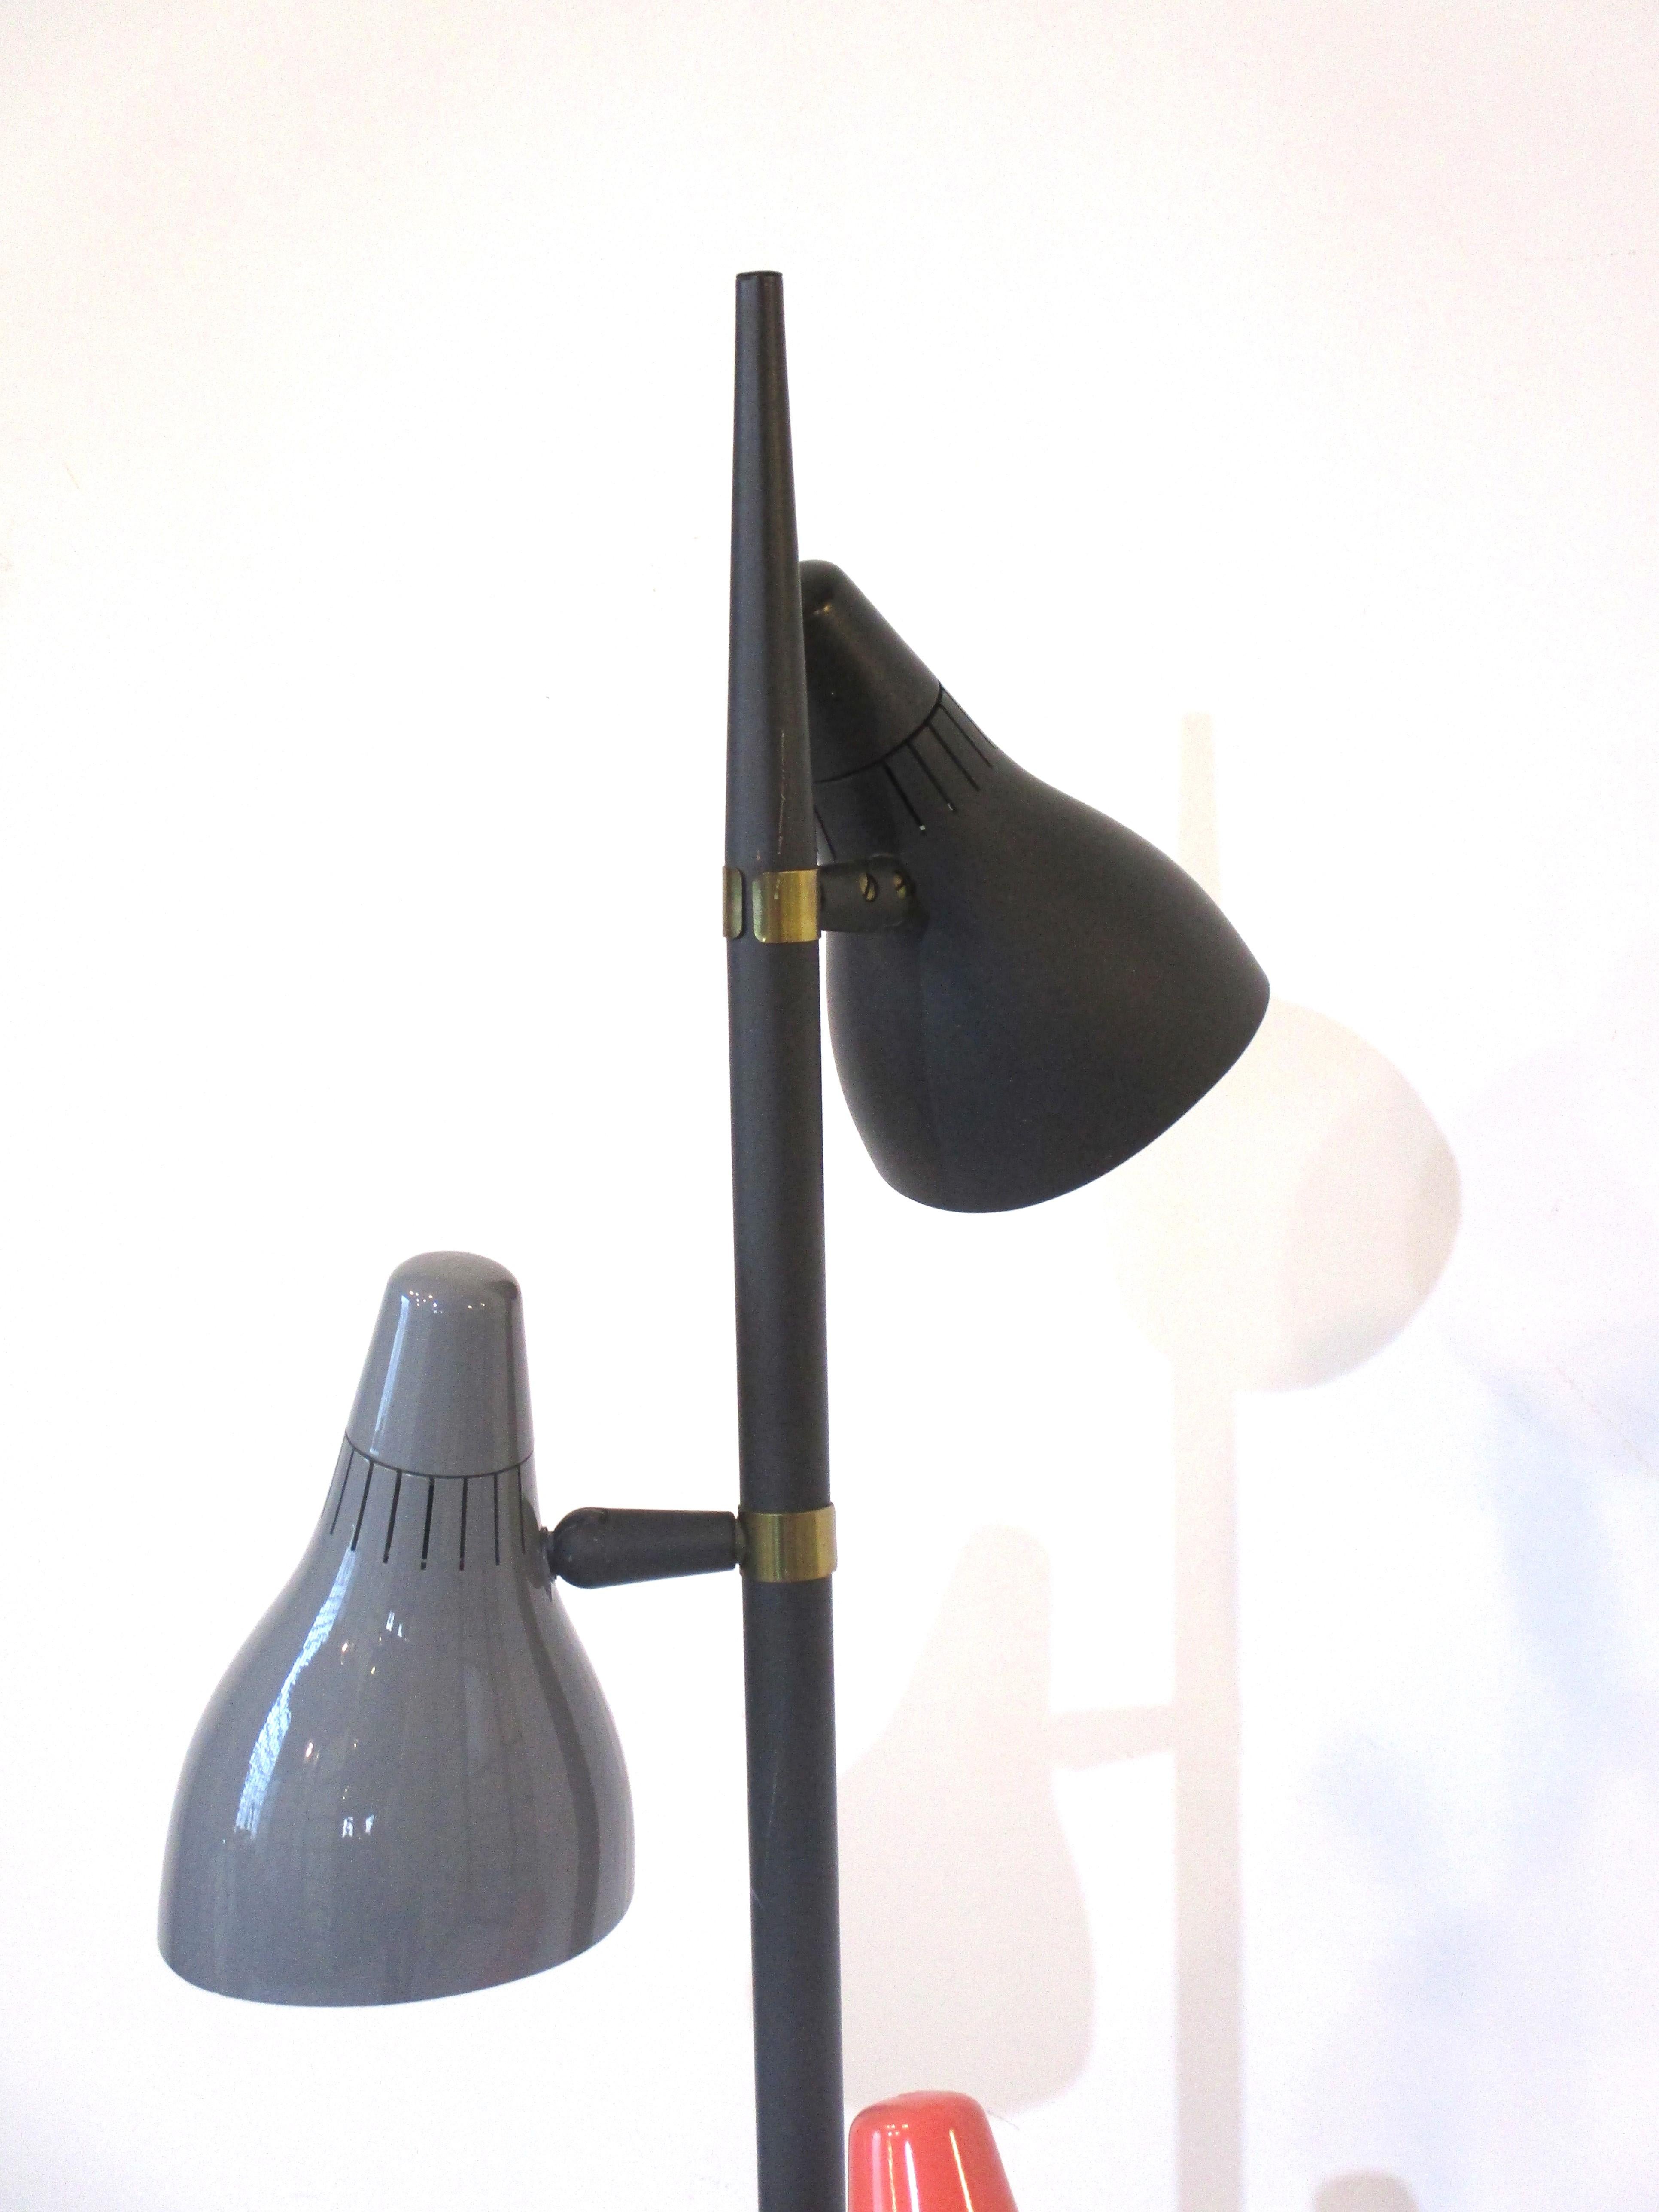 A three headed adjustable Mid Century pole floor lamp with a black, gray and coral plastic shade. The metal pole is in a satin black with round base having a brass ring detail, each lamps rounded top point is a twist and turn type switch.